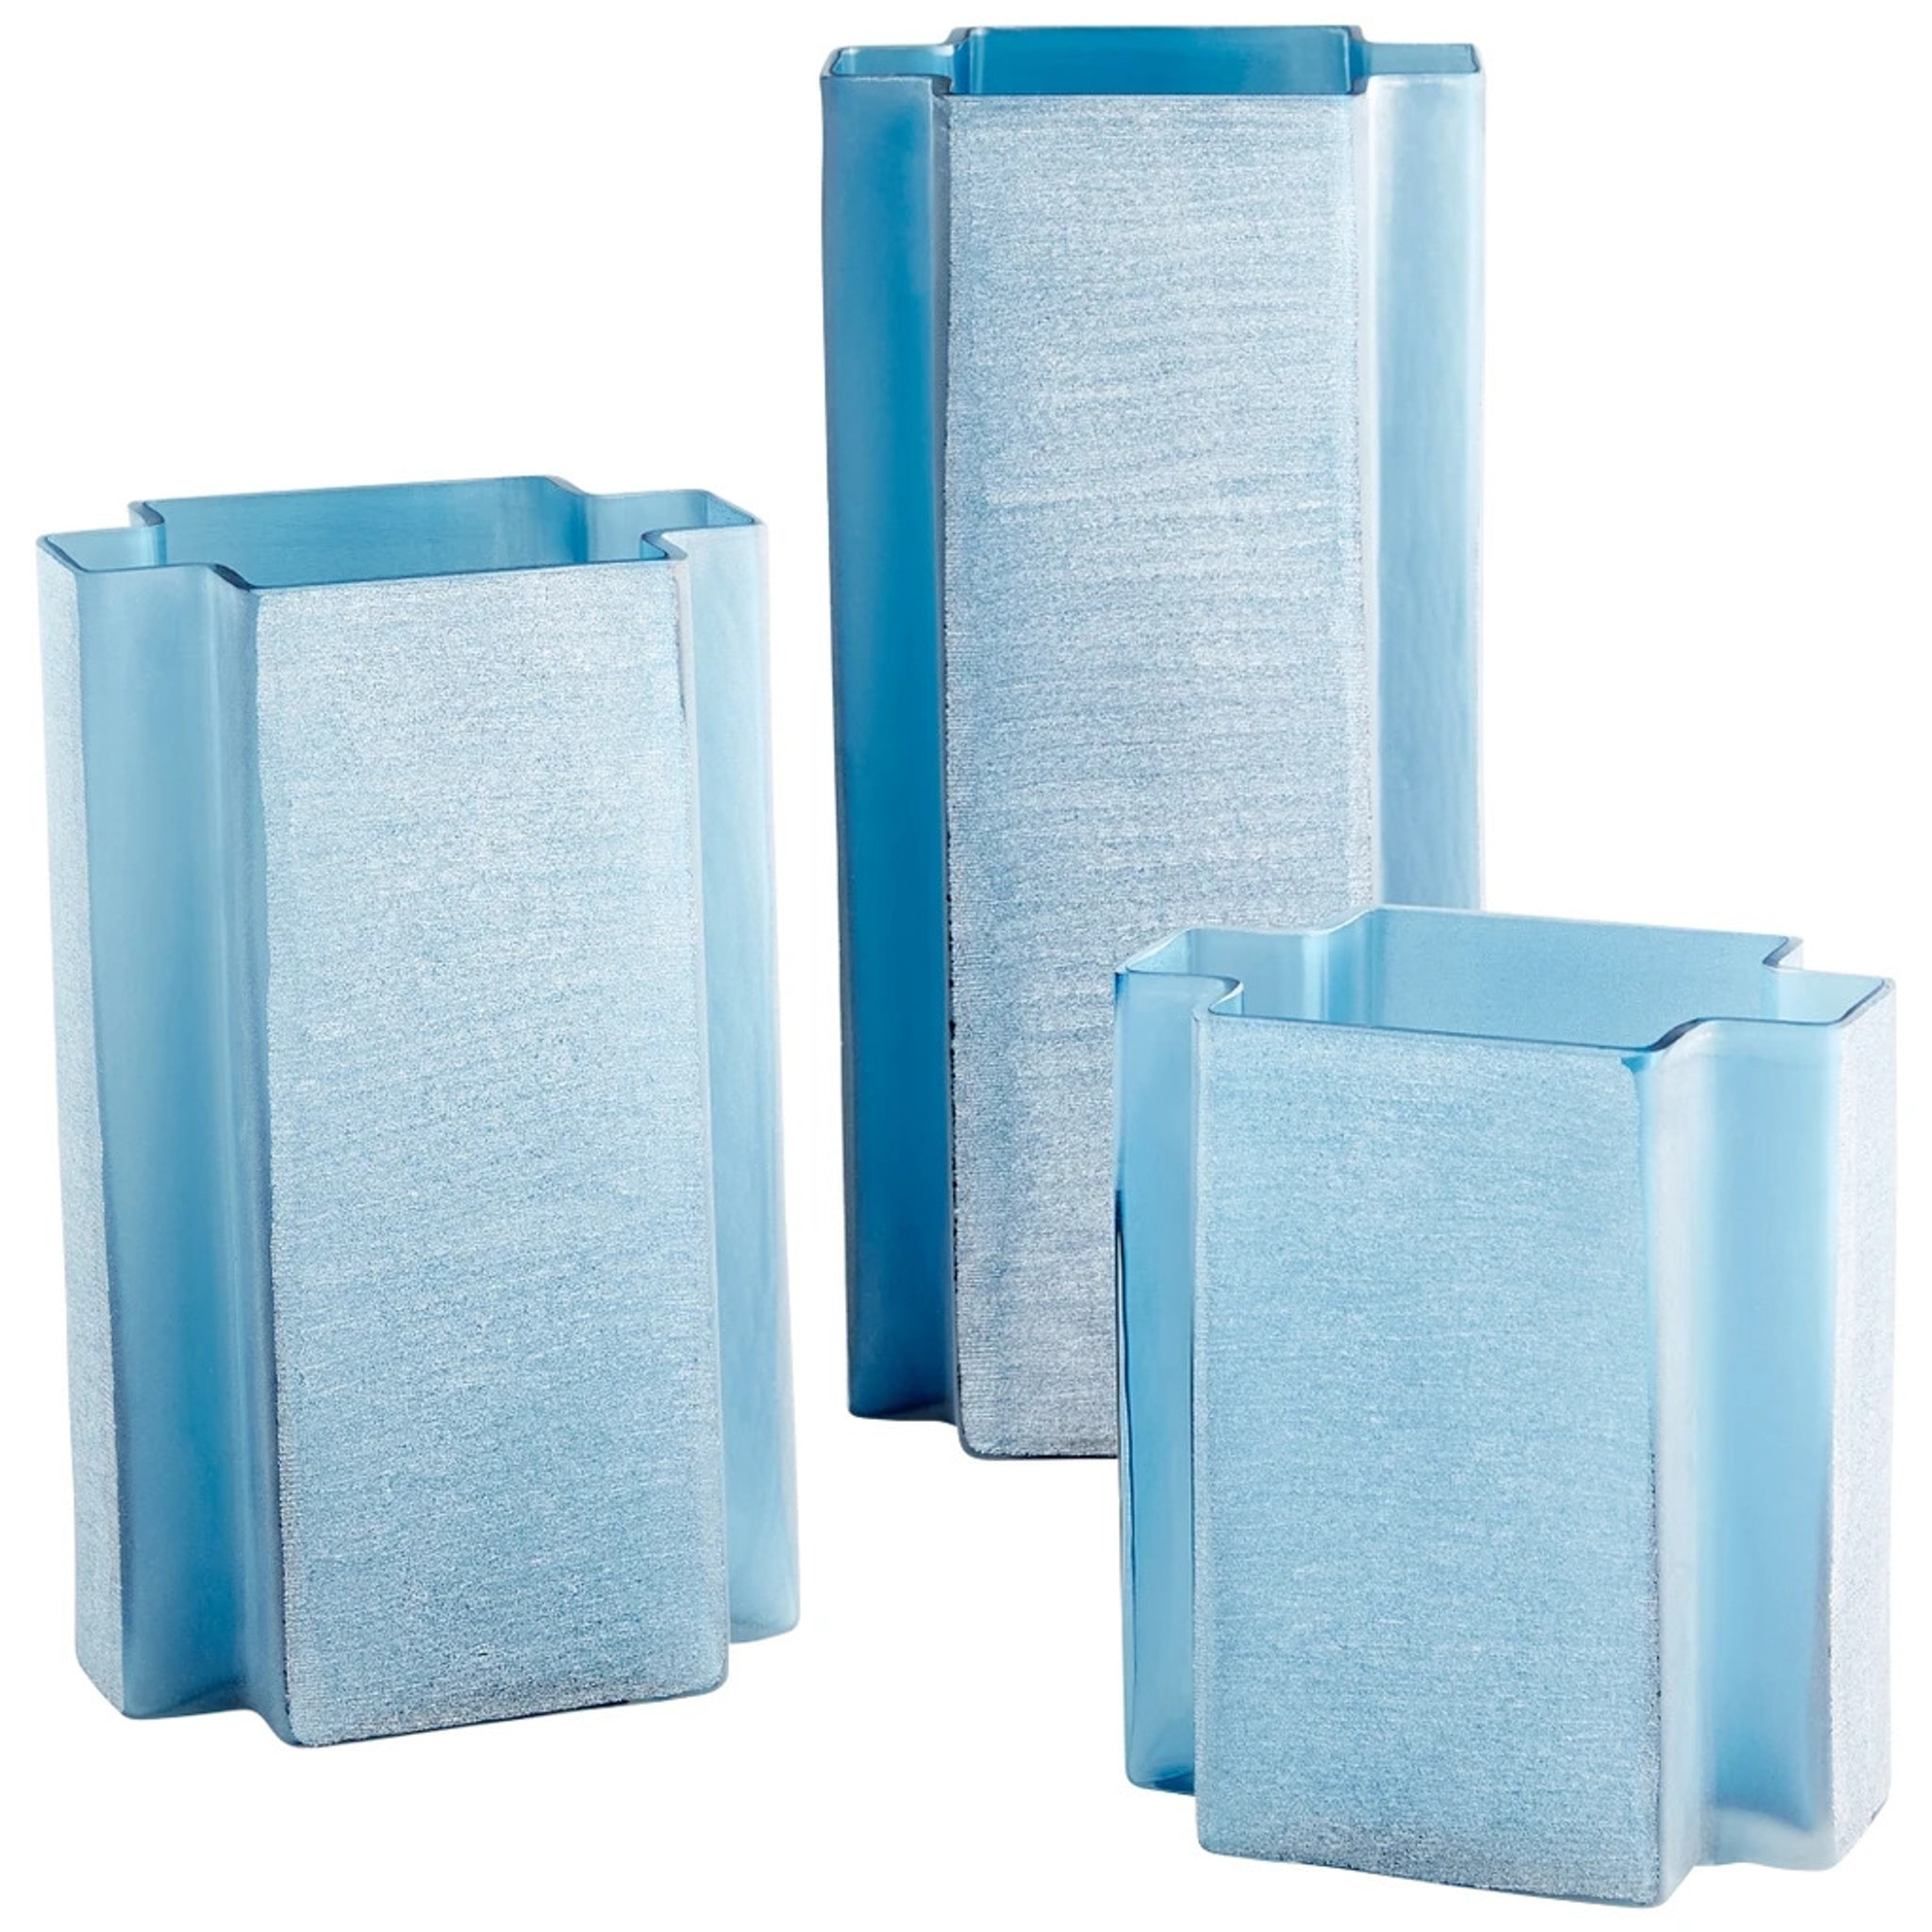 Ice Blue Frosted Glass Tuxedo Vases, Options (sayan vases